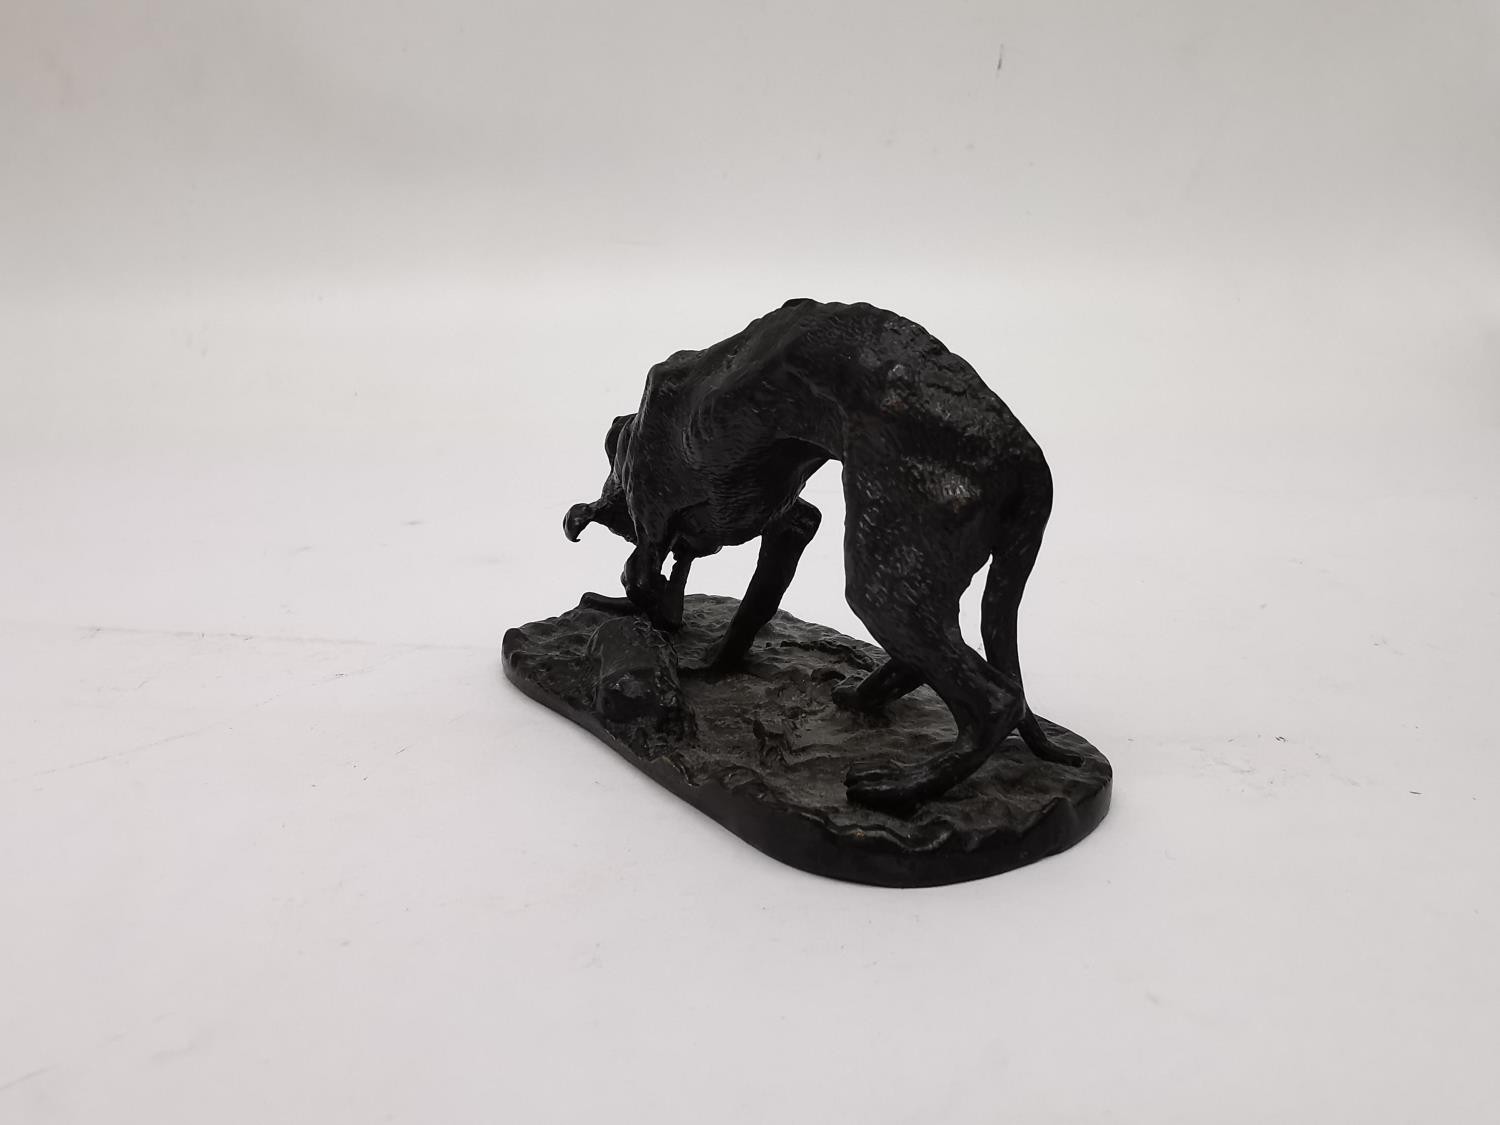 After Pierre-Jules Mene, French, (1810 - 1879), a miniature bronze sculpture of a hunting dog with - Image 5 of 8